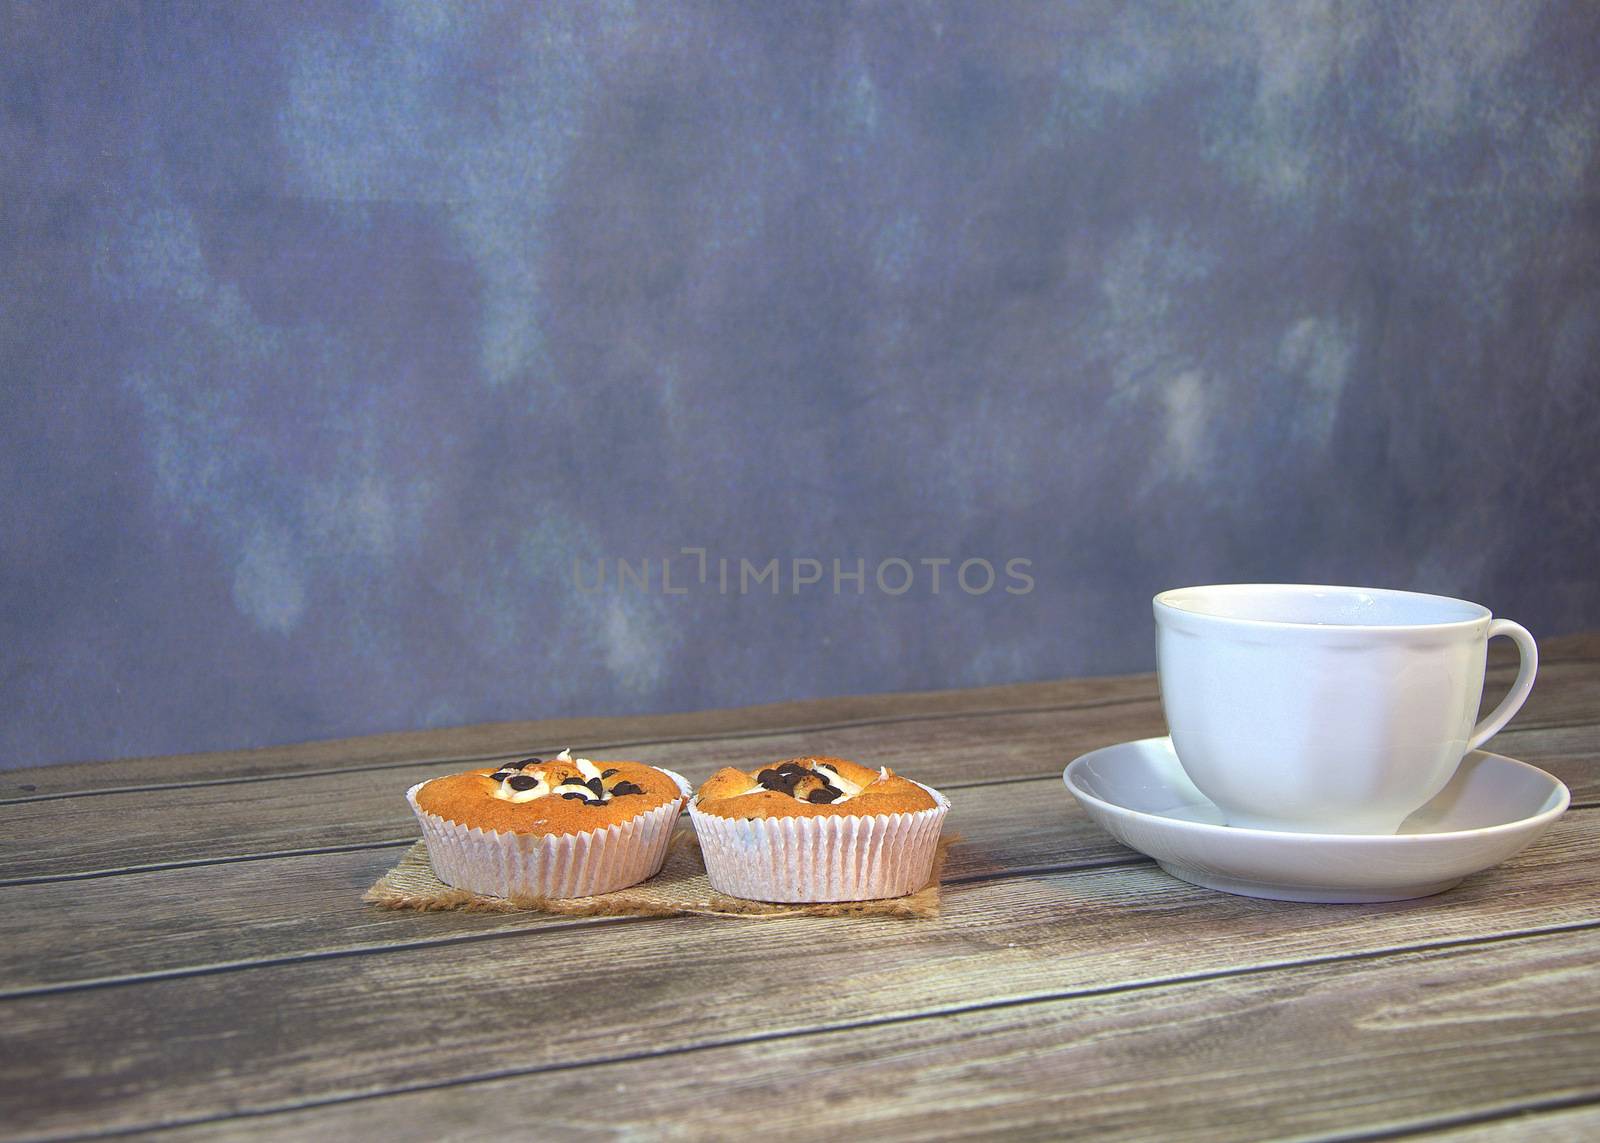 A cup of tea on a saucer and two cupcakes on a textile napkin. Close-up.